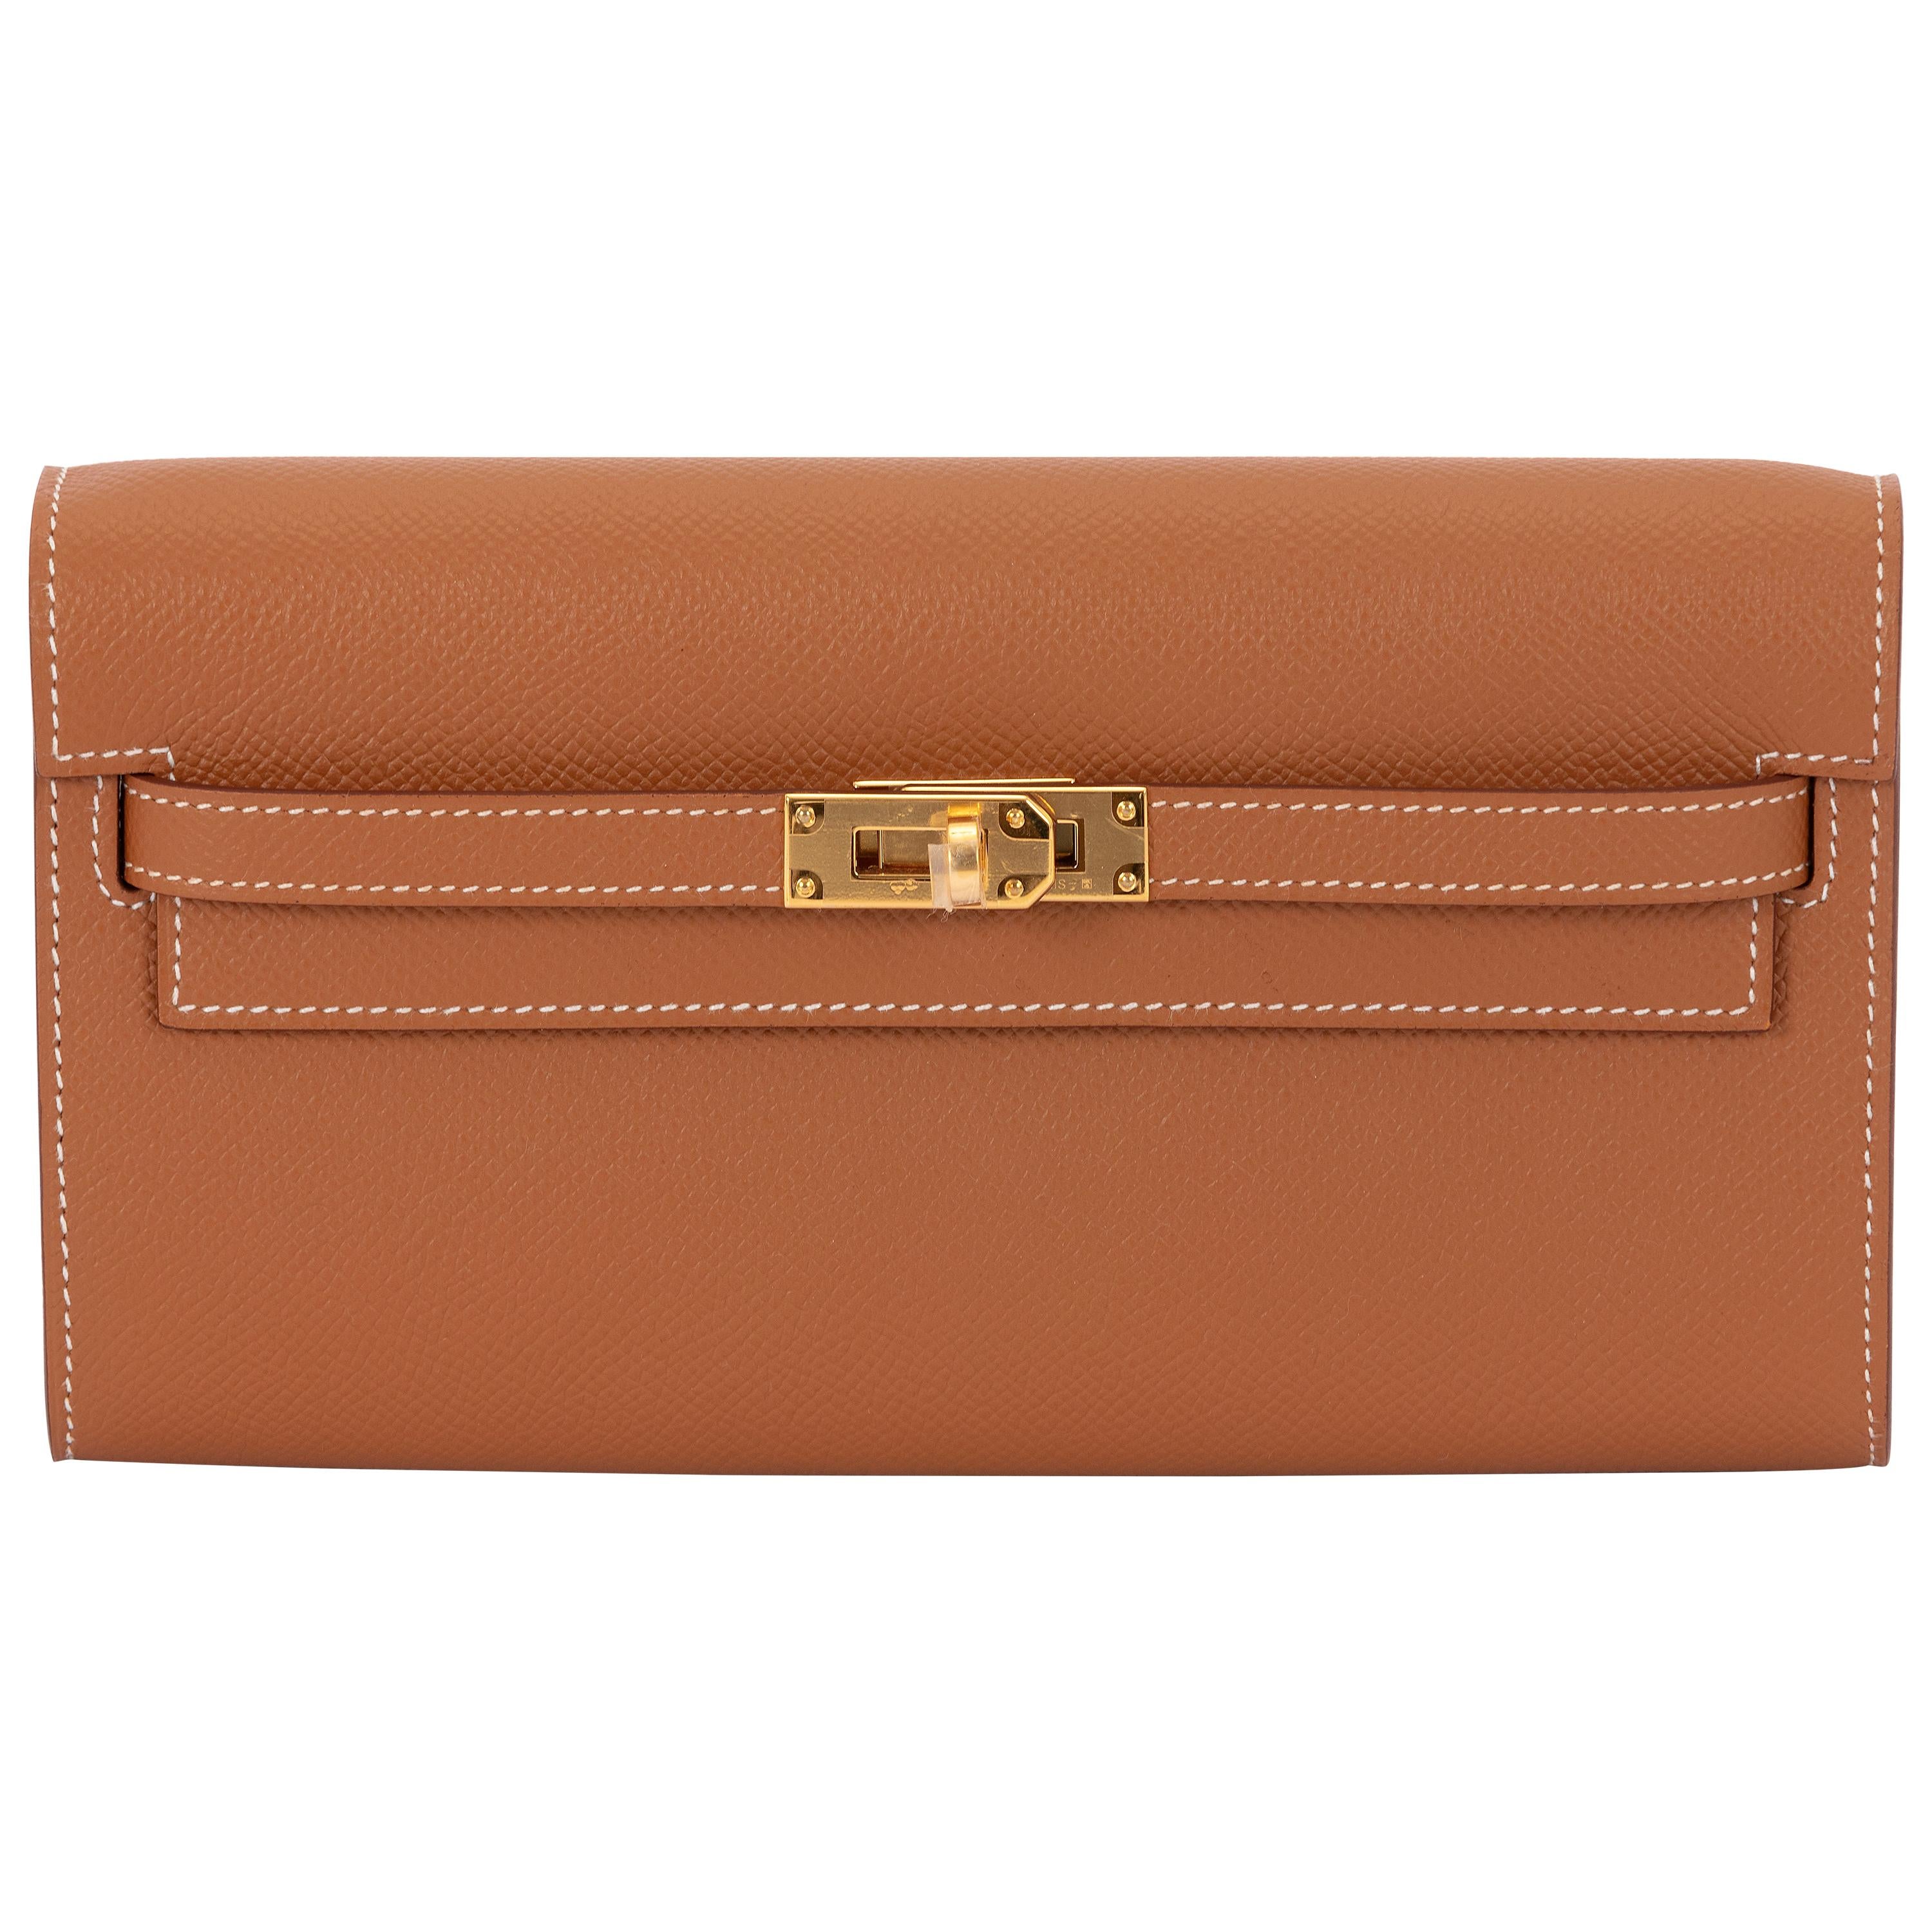 The much-anticipated wallet on a chain from Hermès is finally here. The Hermès Kelly To Go Leather Clutch is crafted in France from Epsom leather, favoured for its textured appearance and known for its scratch-resistant qualities. With a matching